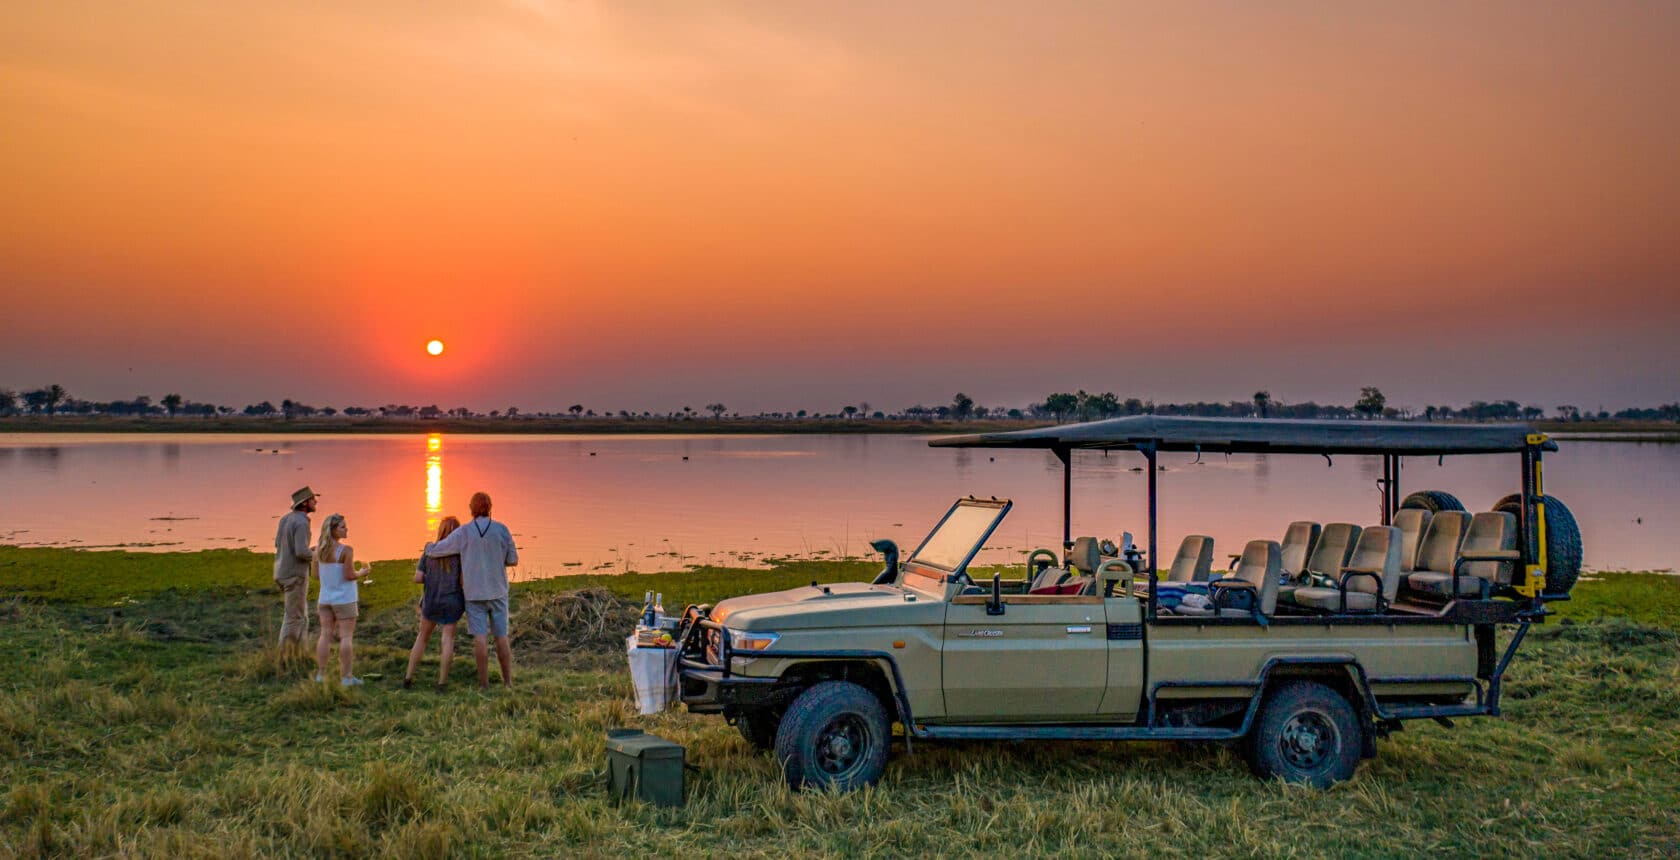 A group of travelers watching a sunset on a safari in Moremi National Park in Botswana.